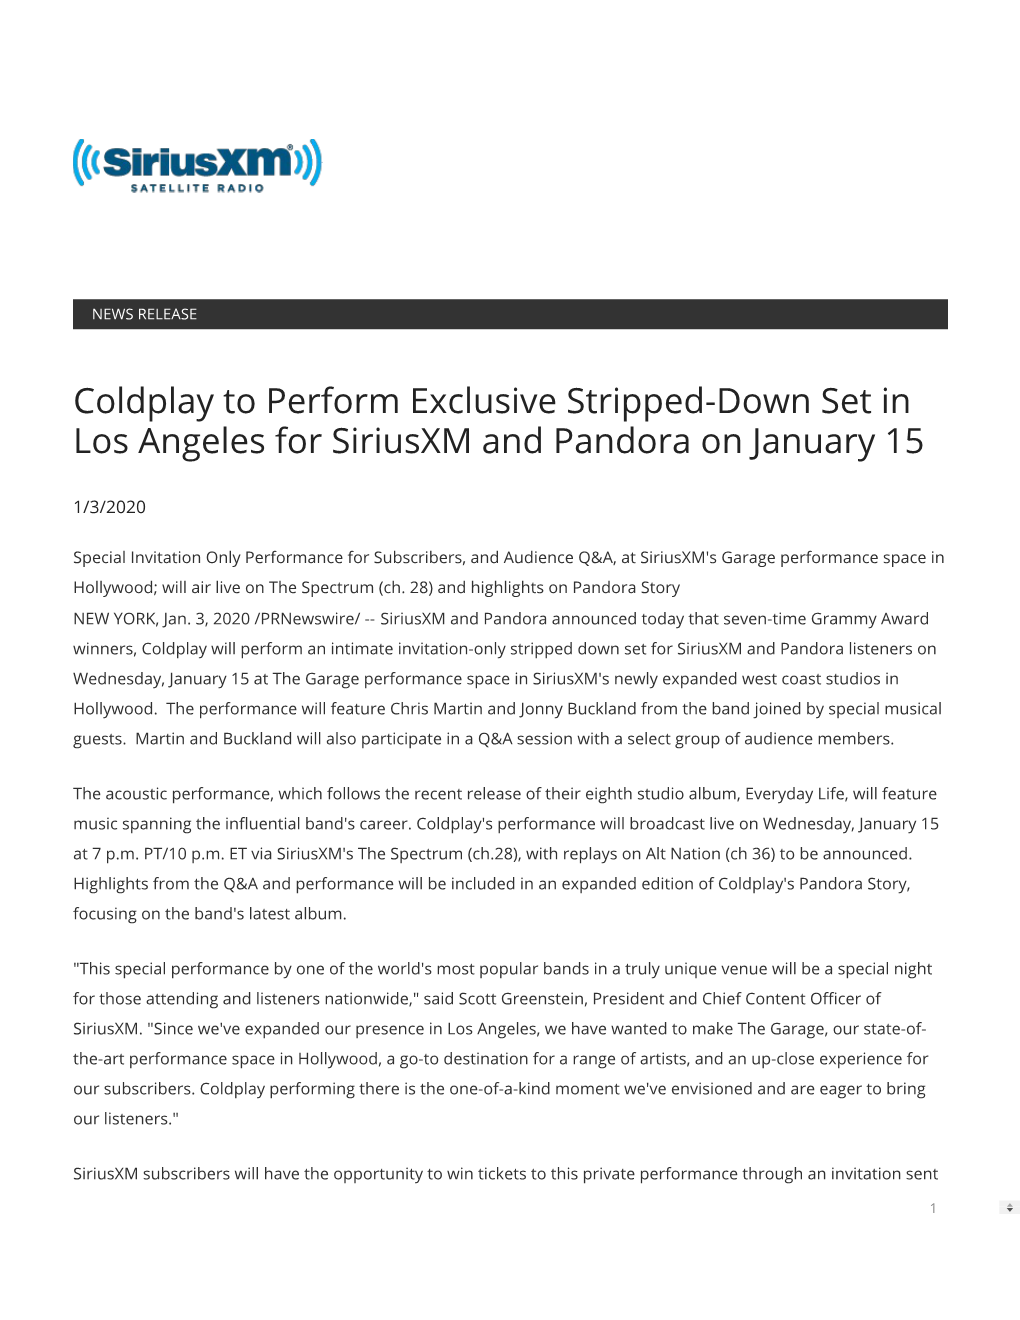 Coldplay to Perform Exclusive Stripped-Down Set in Los Angeles for Siriusxm and Pandora on January 15